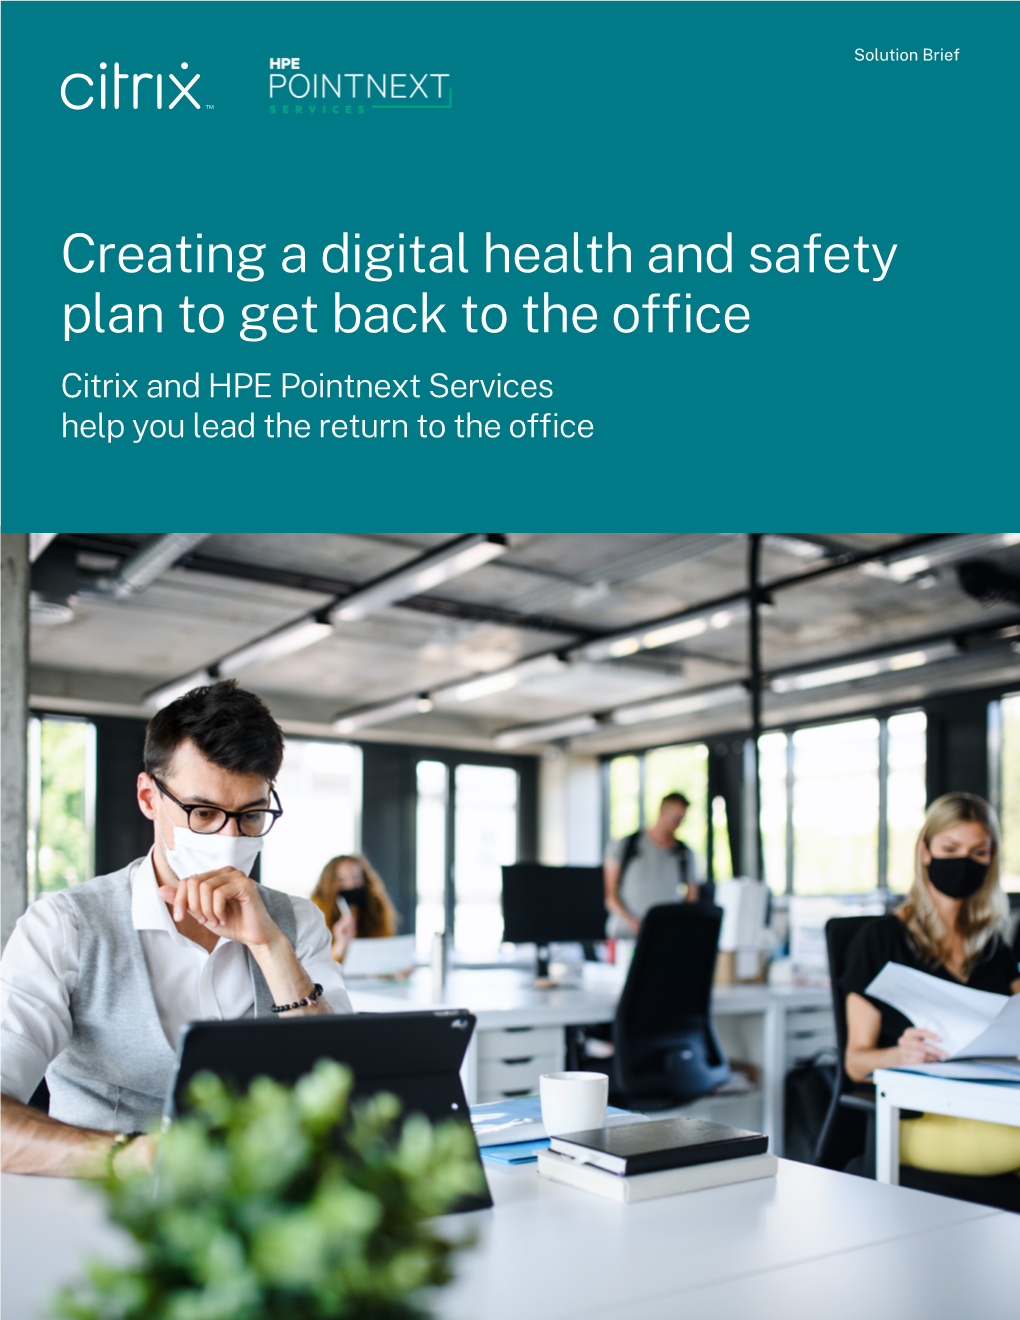 Creating a Digital Health and Safety Plan to Get Back to the Office